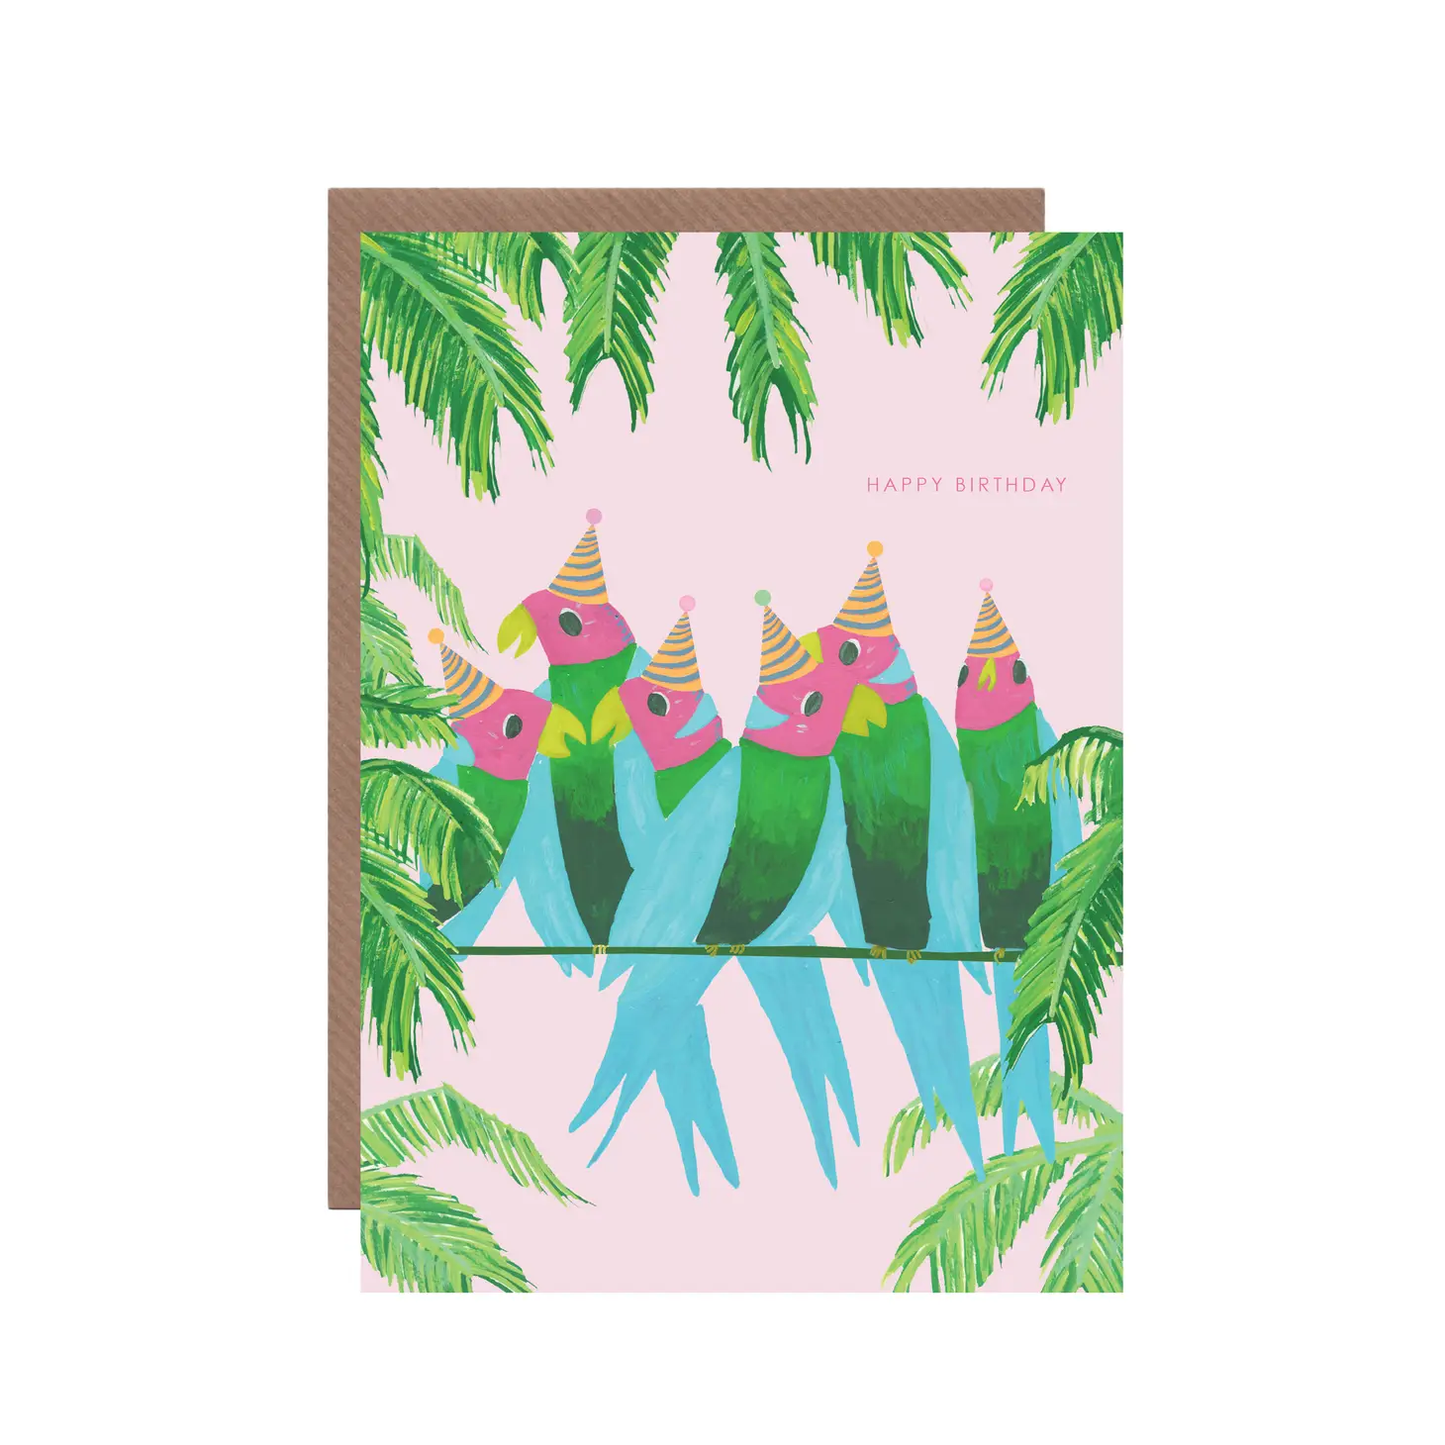 Parrot Party Greeting Card